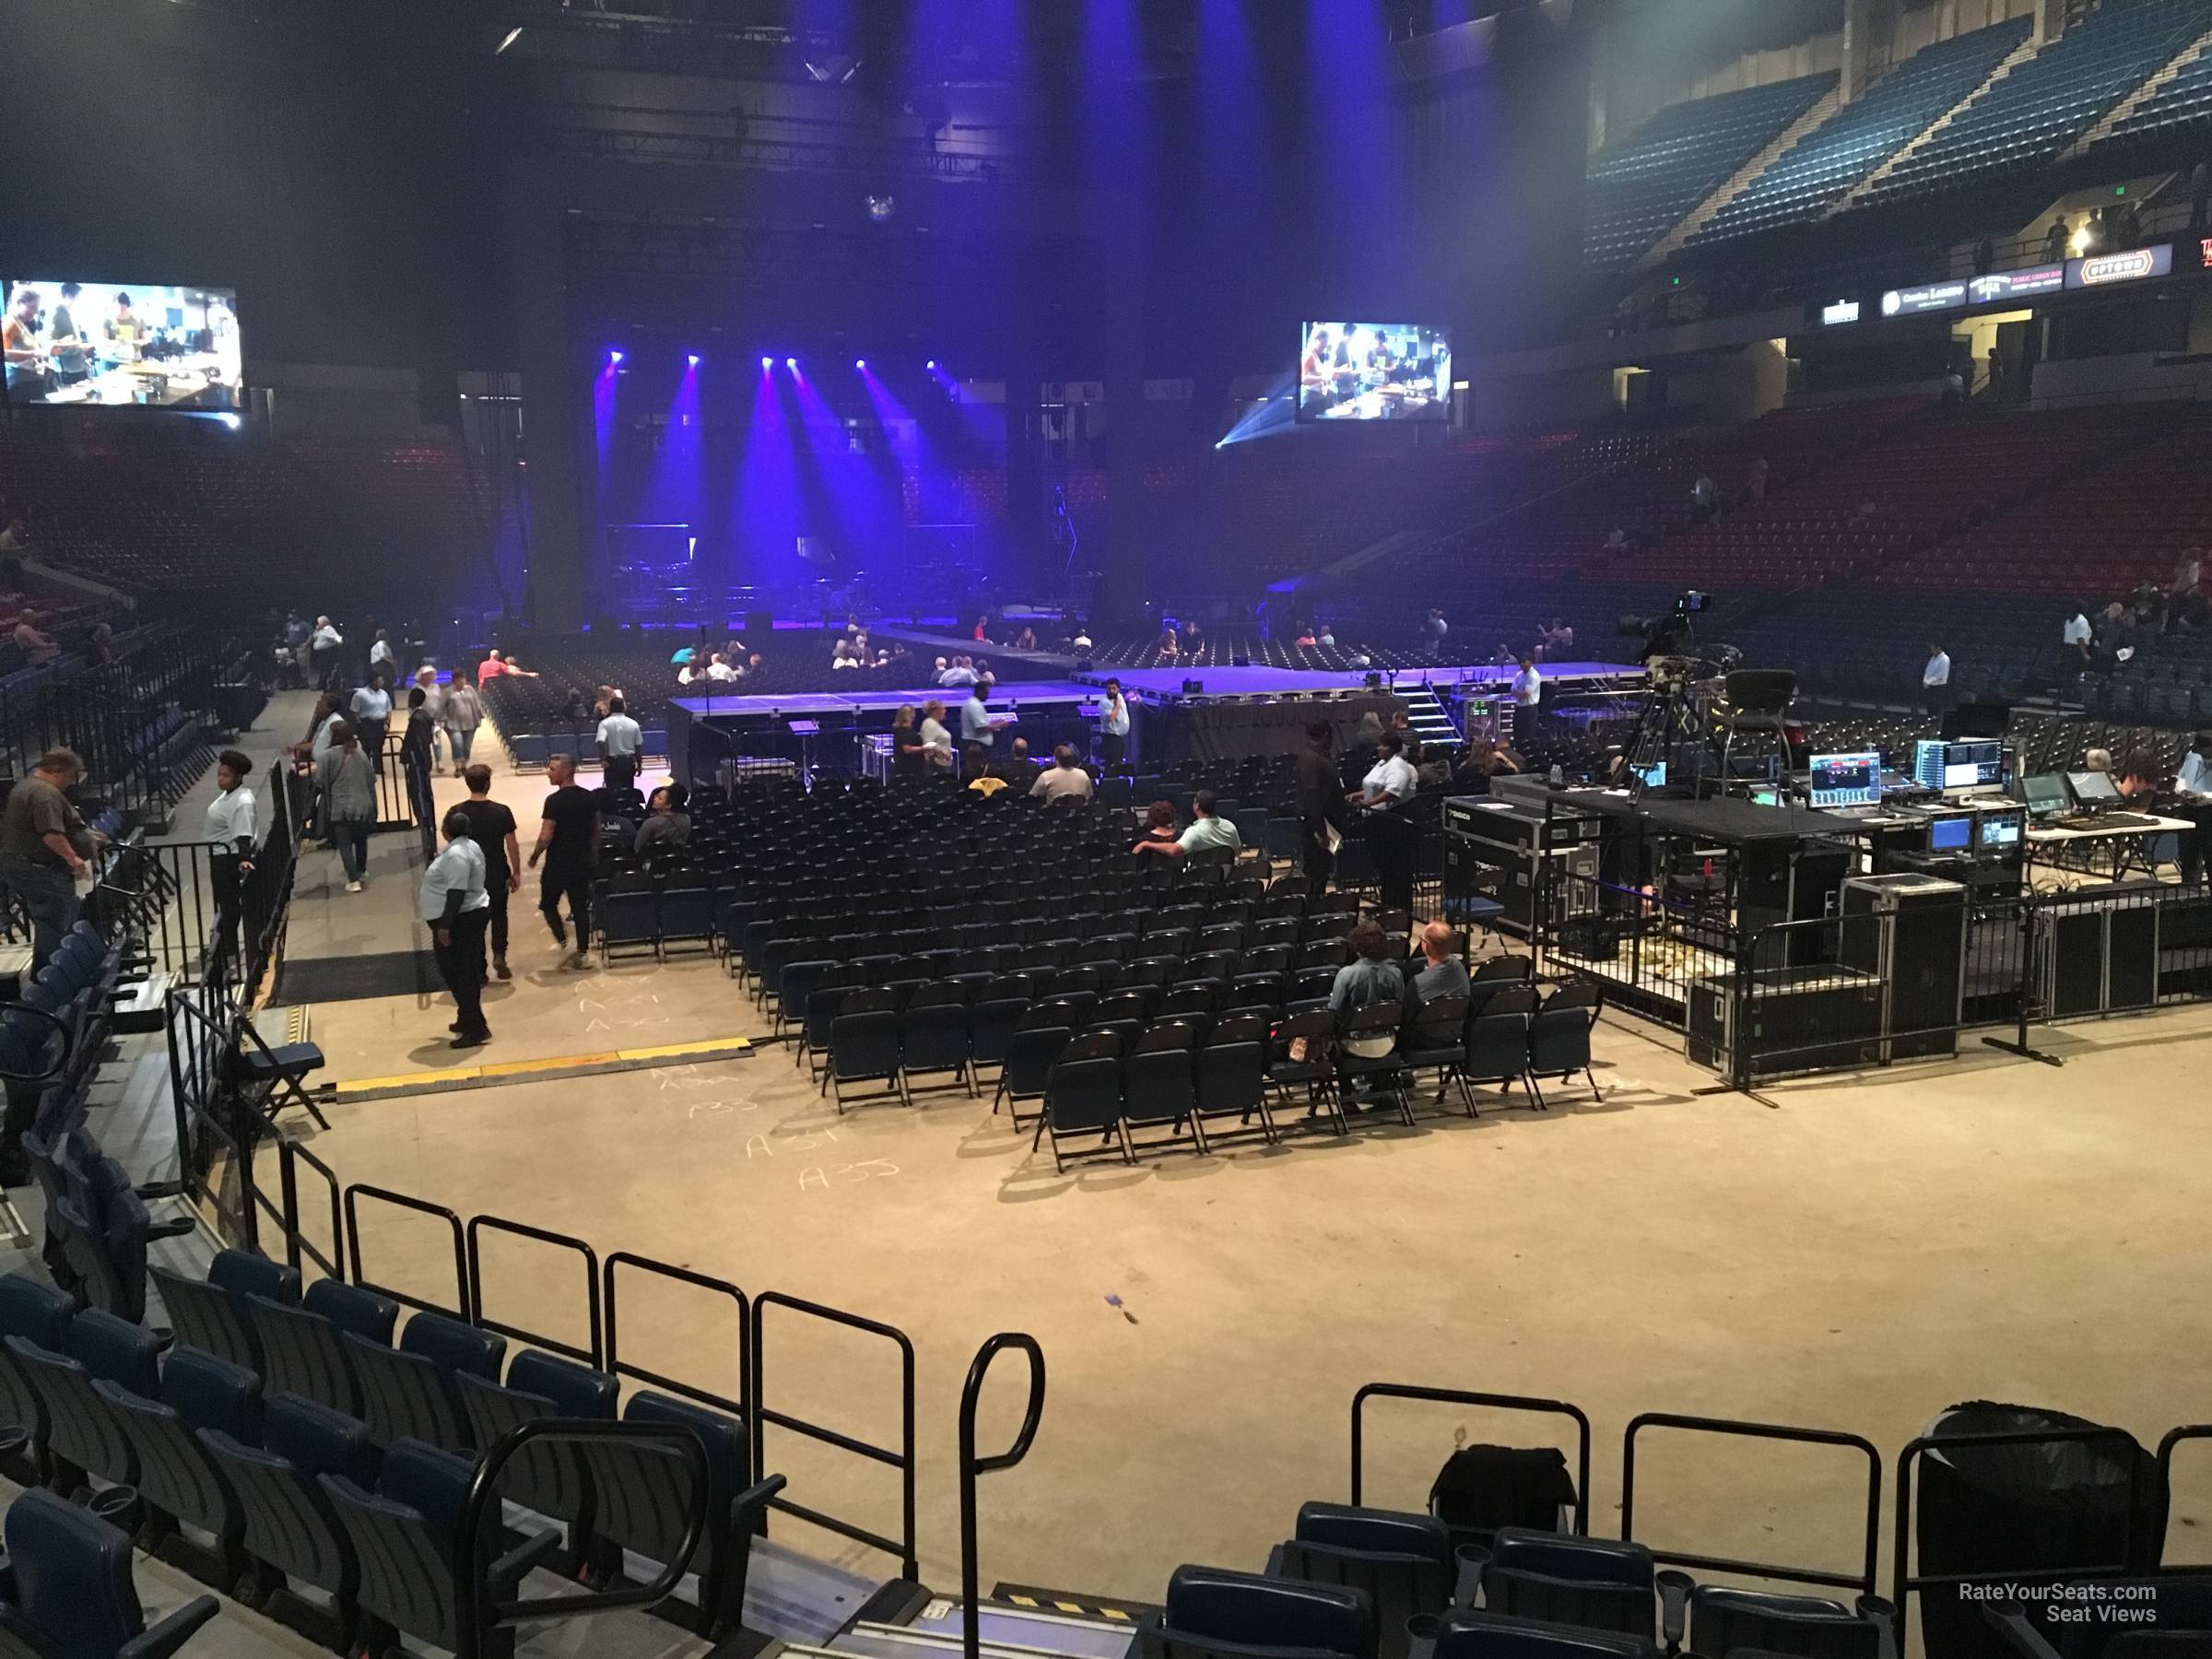 section 124, row h seat view  - legacy arena at the bjcc